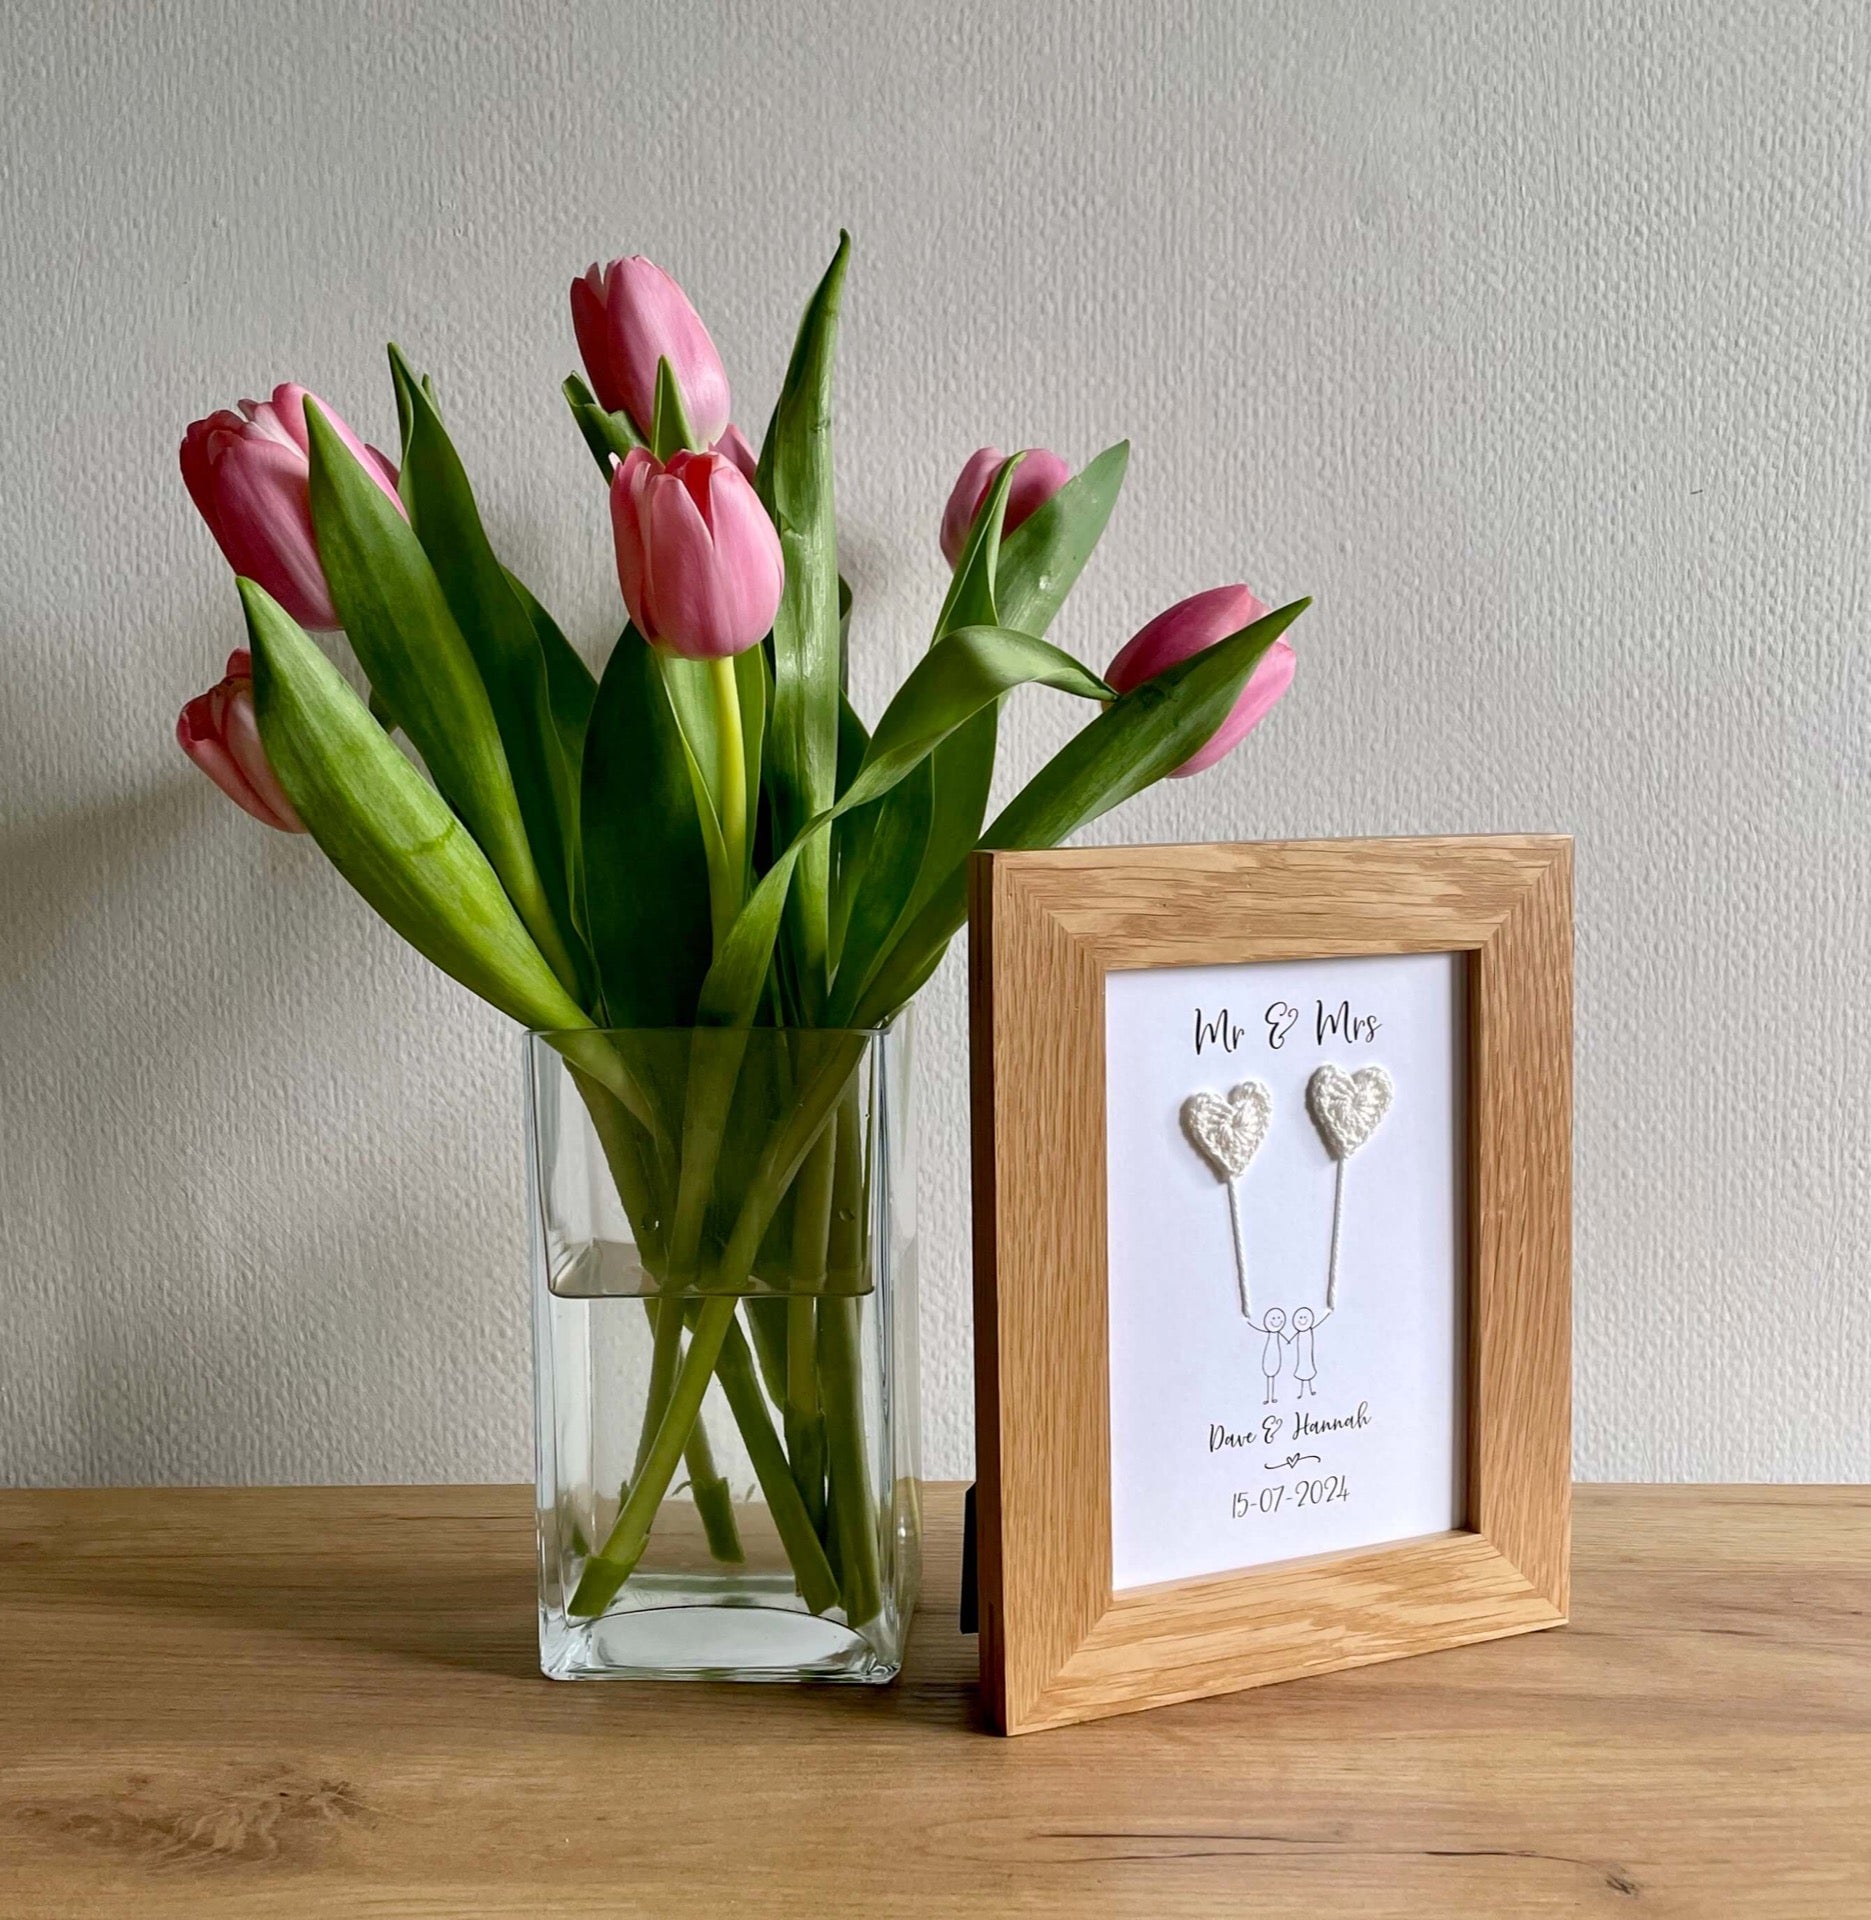 A personalised wedding card with ivory coloured crochet hearts framed in an oak frame. The frame sits next to a glass vase of pink tulips. 